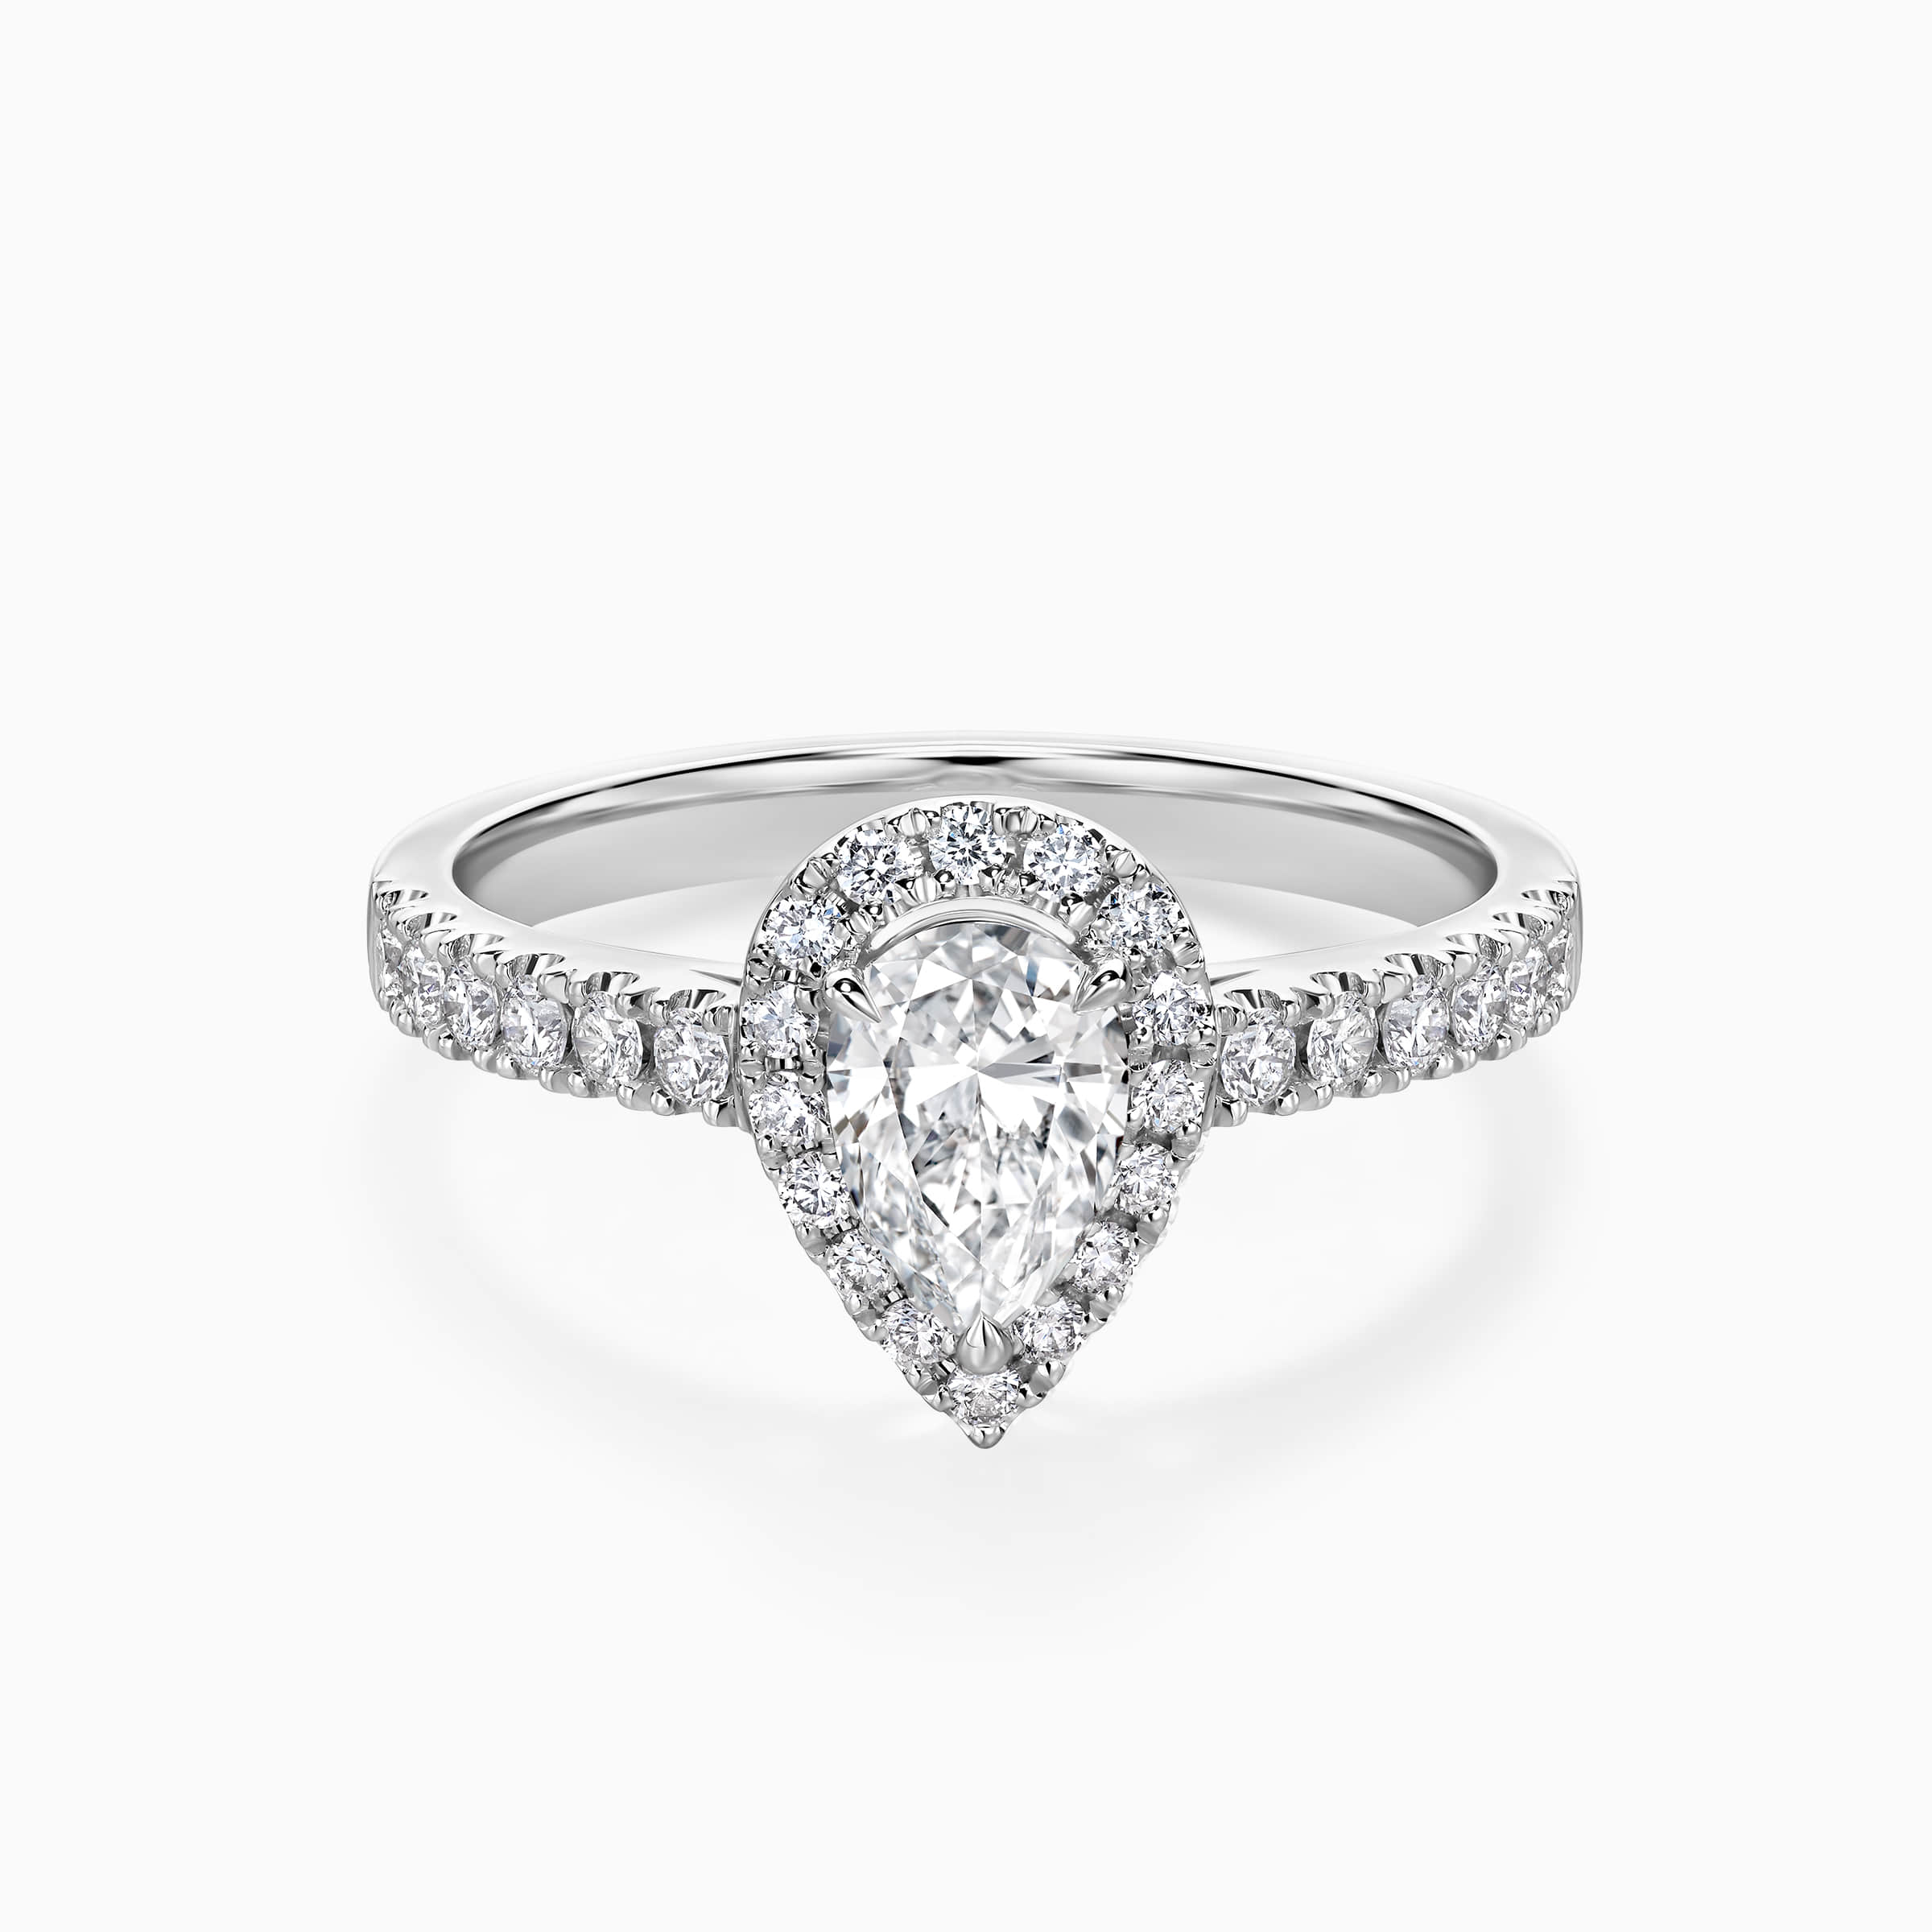 Darry Ring teardrop engagement ring in white gold